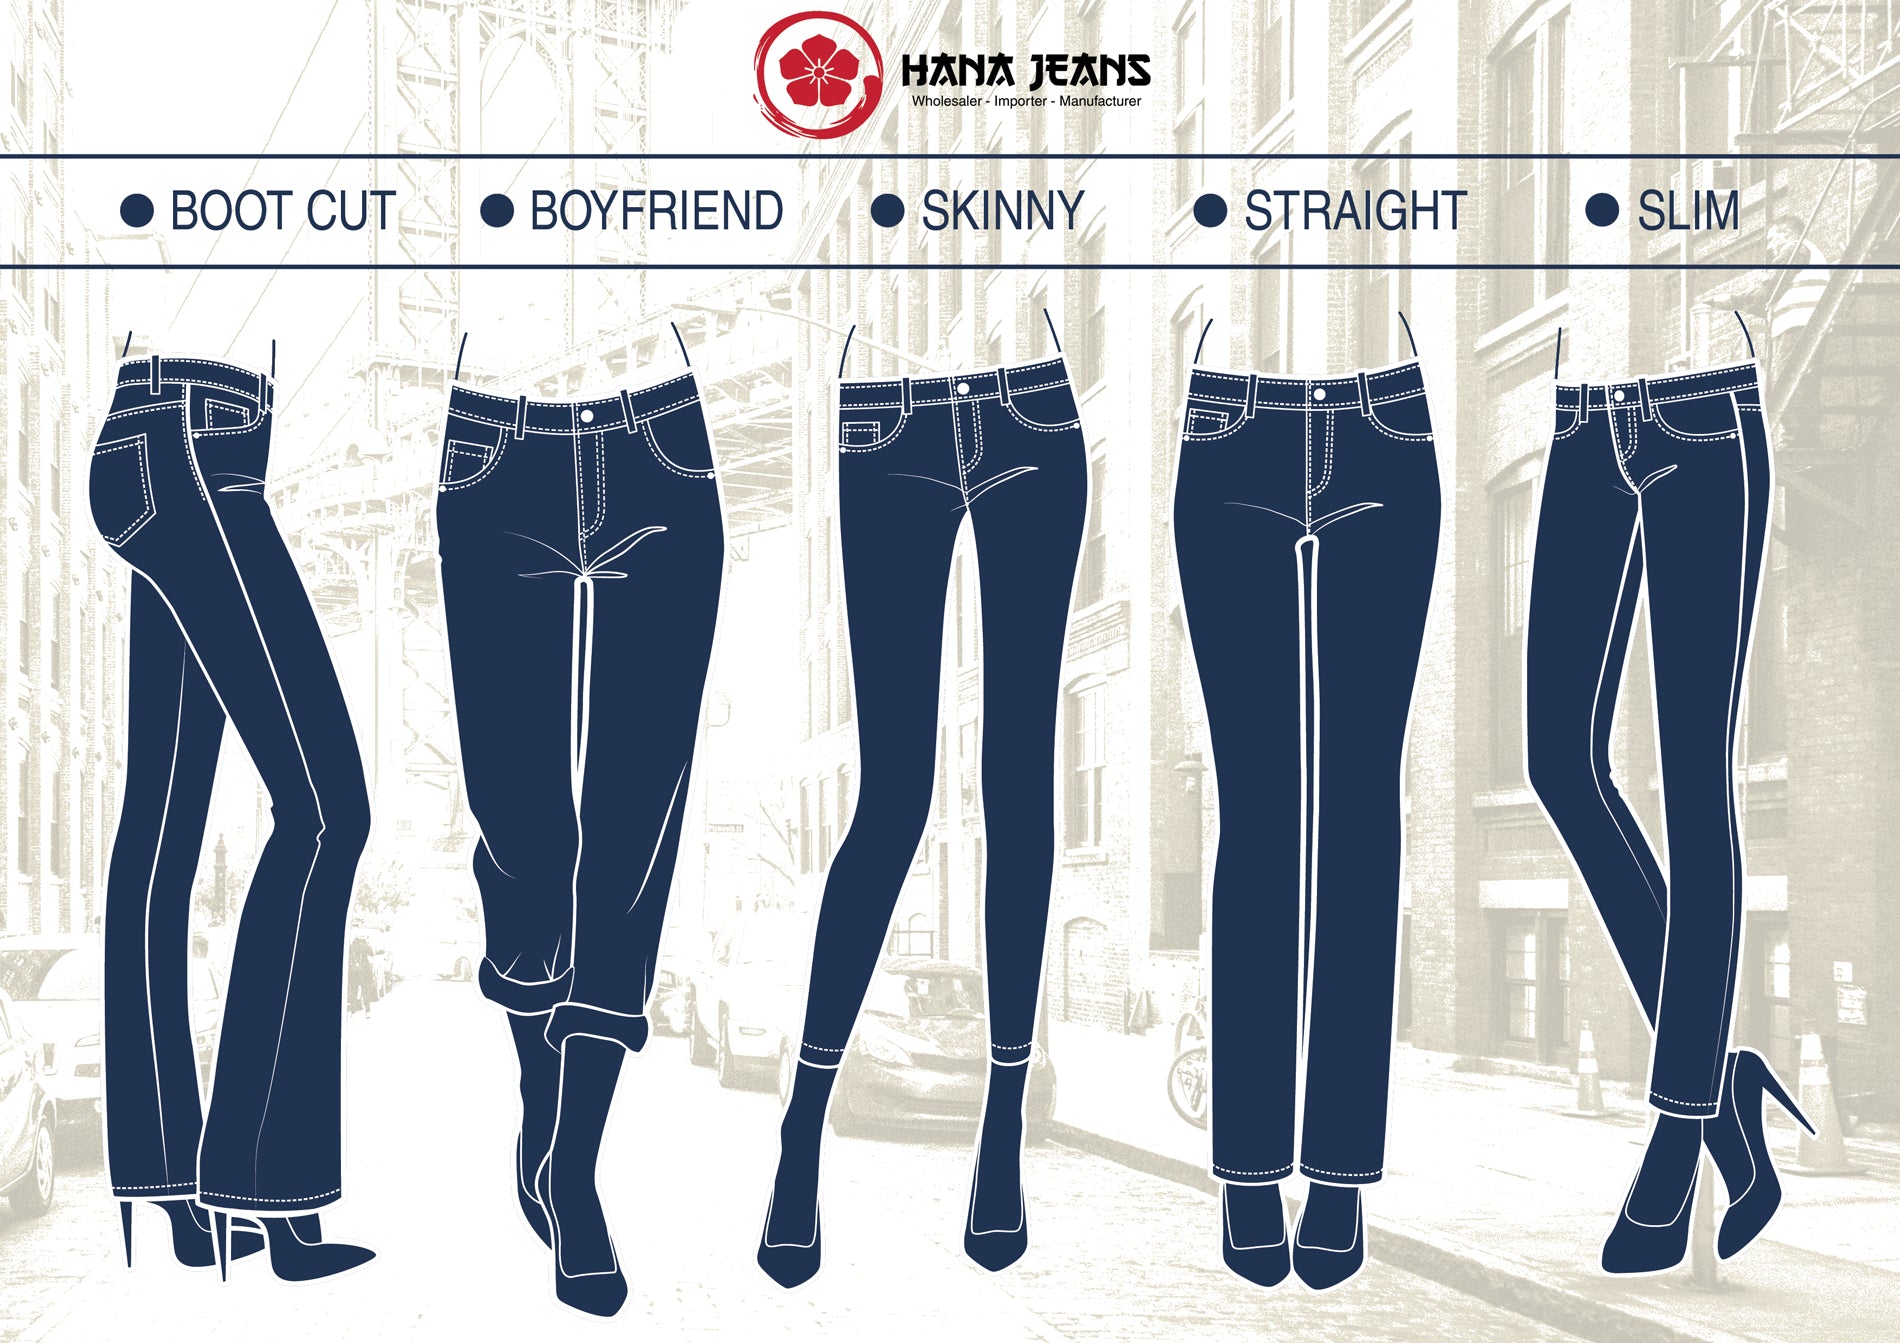 Difference in “cuts” and styles of Denim Jeans image